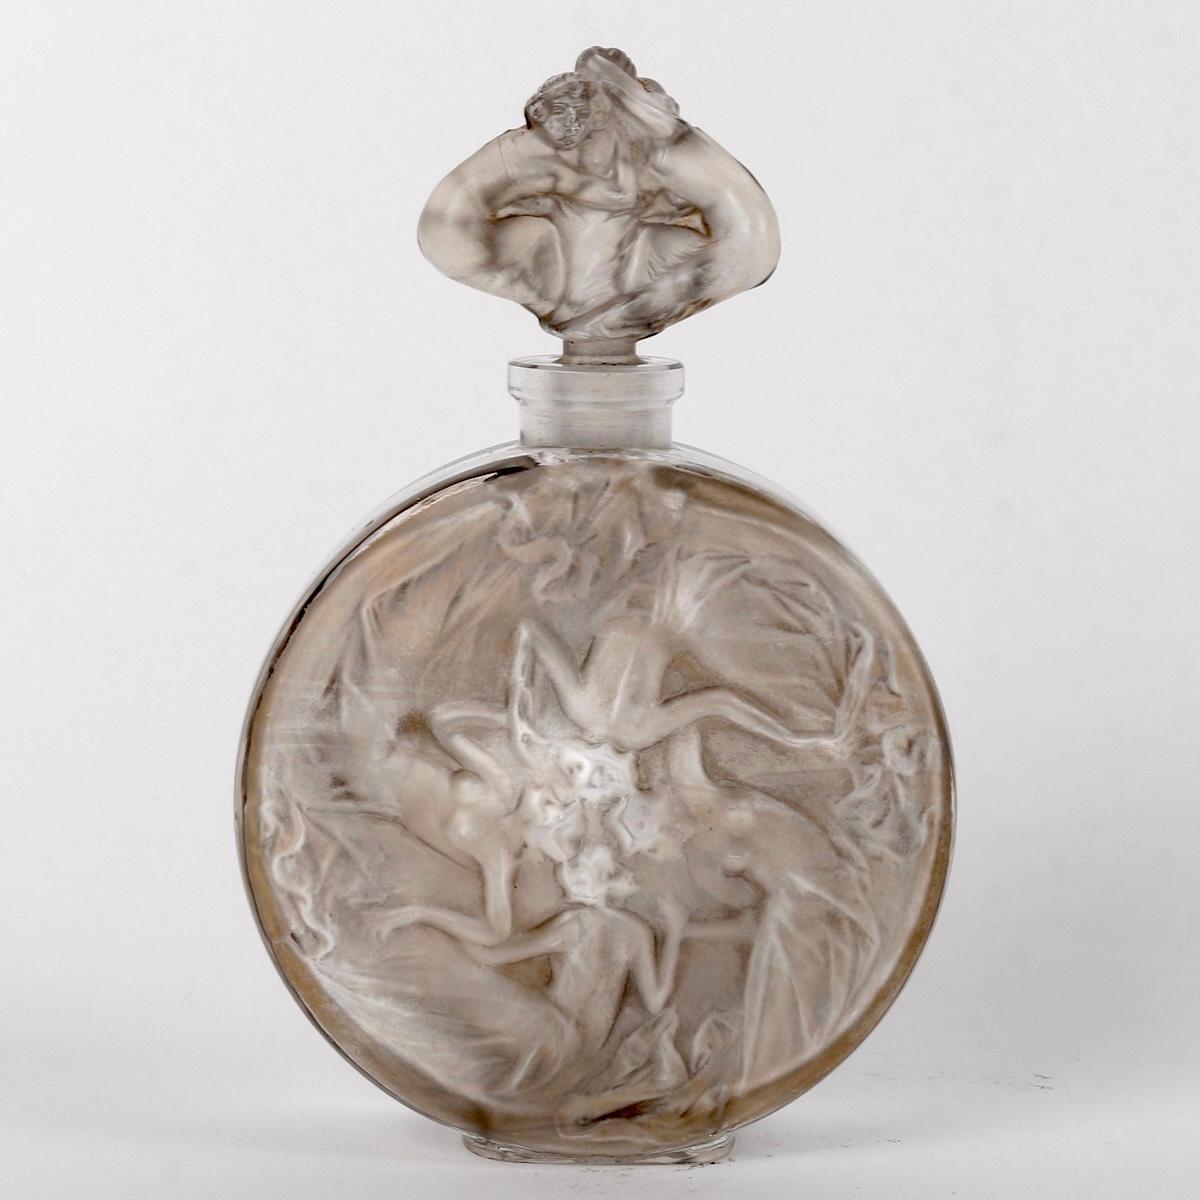 Molded 1912 René Lalique Perfume Bottle Rosace Figurines Frosted Glass Grey Patina For Sale